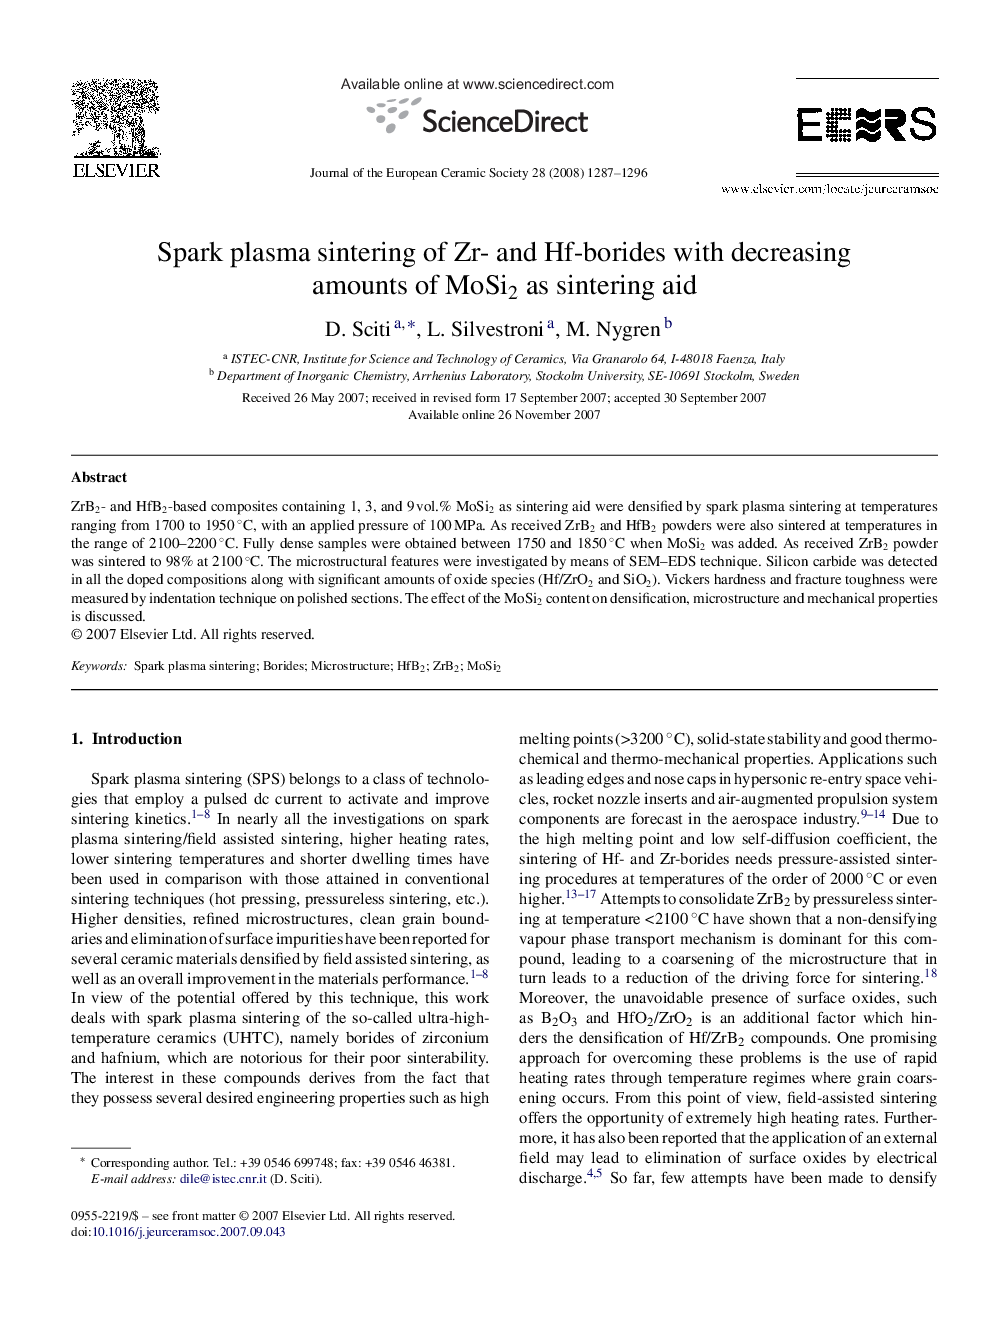 Spark plasma sintering of Zr- and Hf-borides with decreasing amounts of MoSi2 as sintering aid